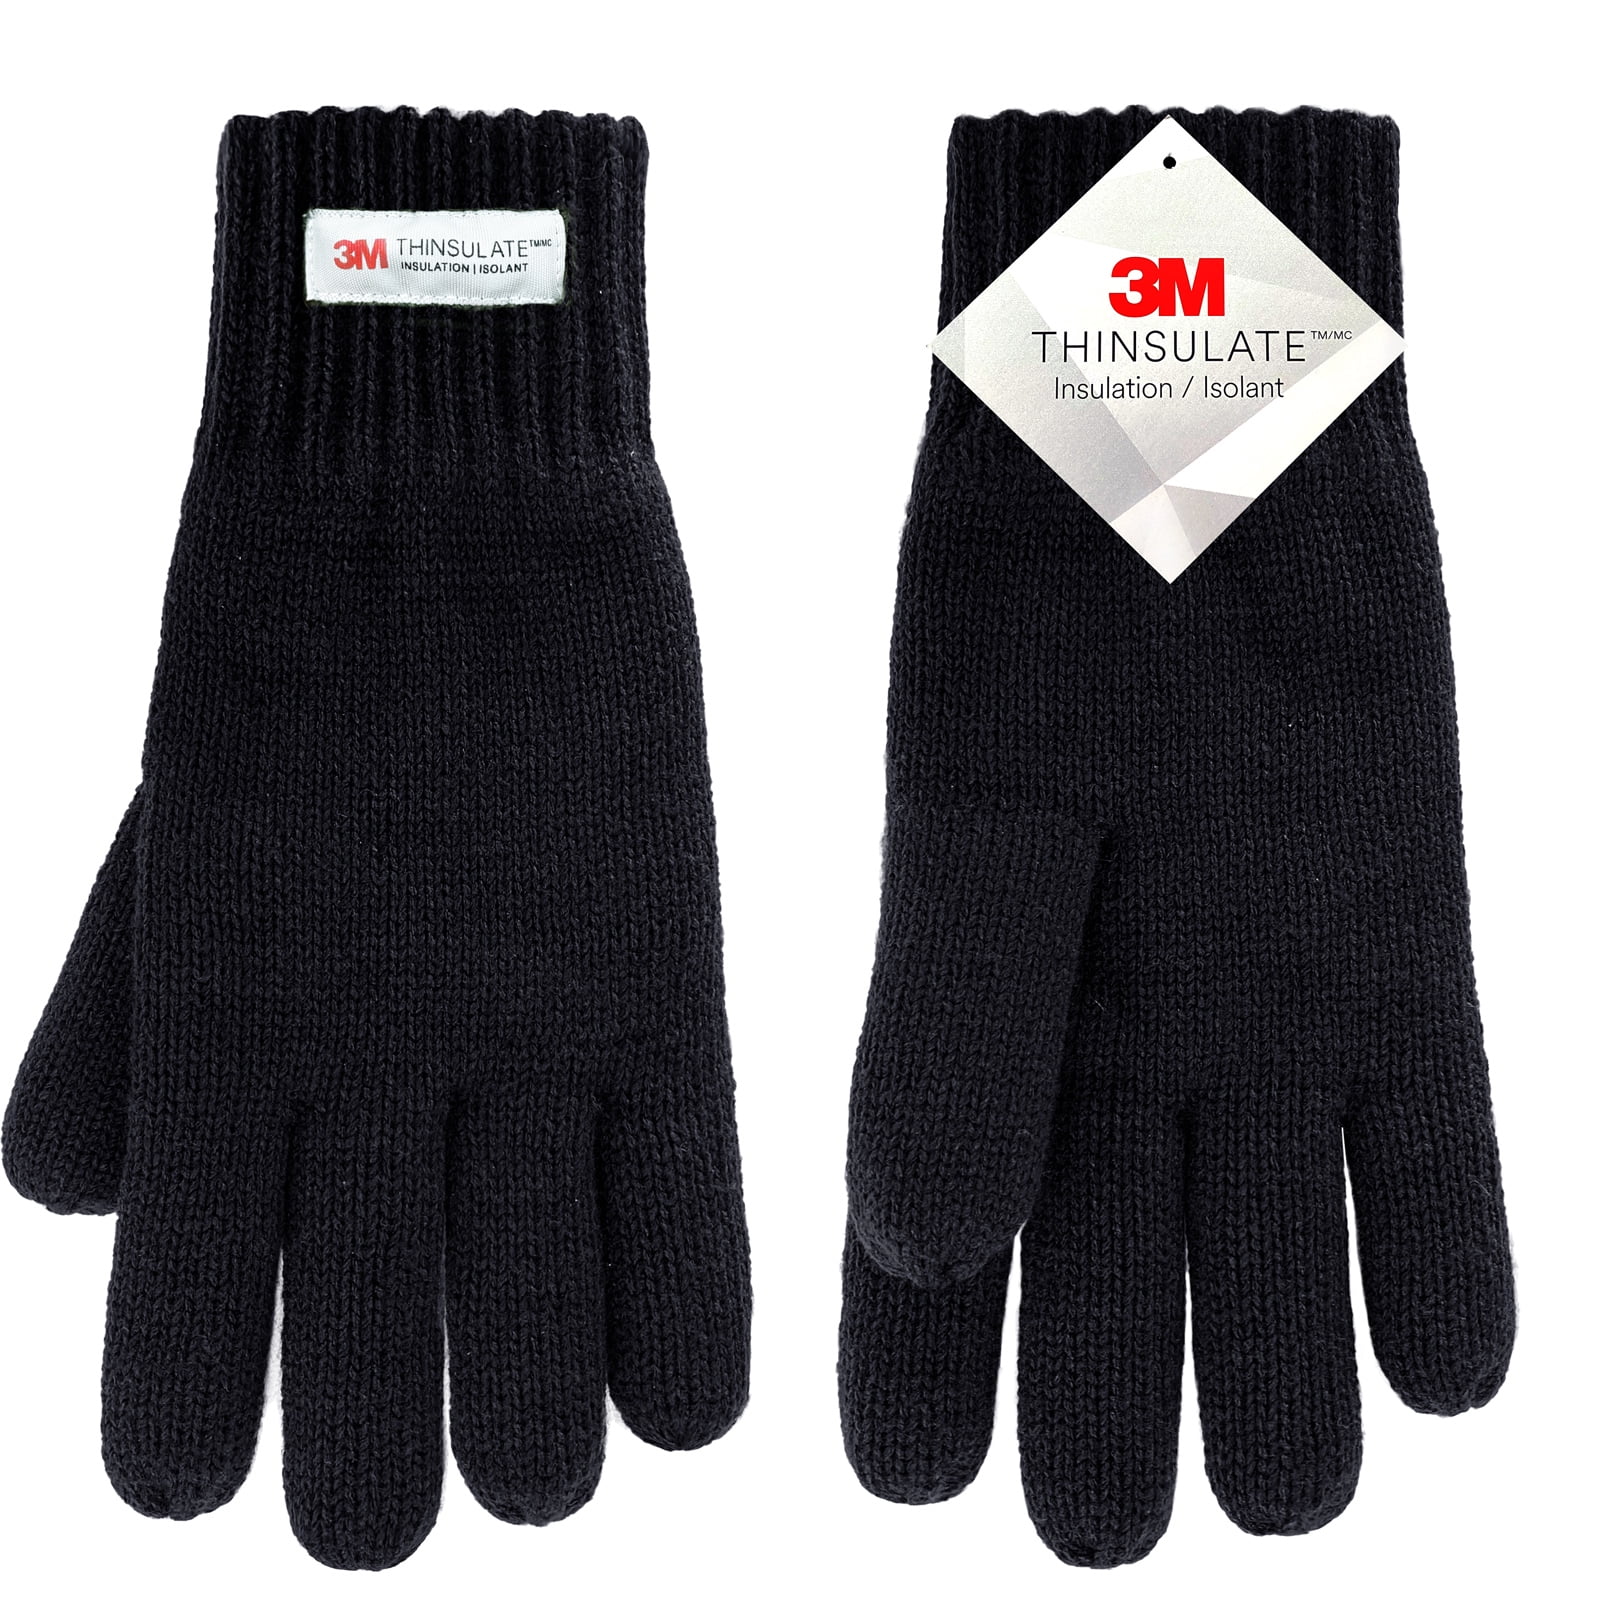 Mens 3M BLACK THINSULATE THERMAL LINED WINTER GLOVES SMALL/MED 